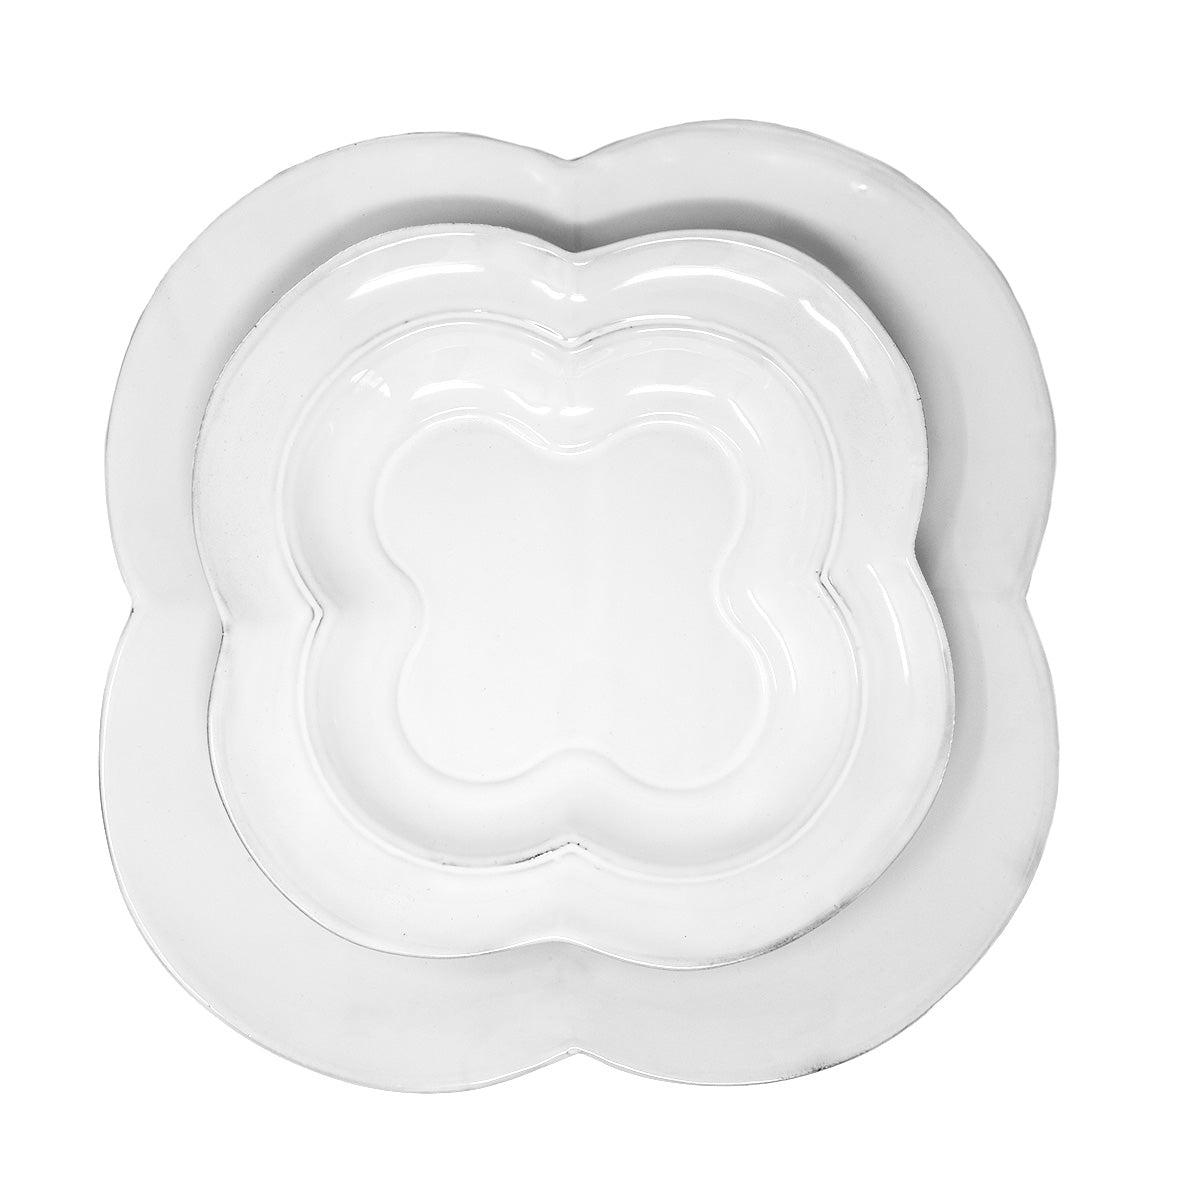 Mademoiselle shallow plate